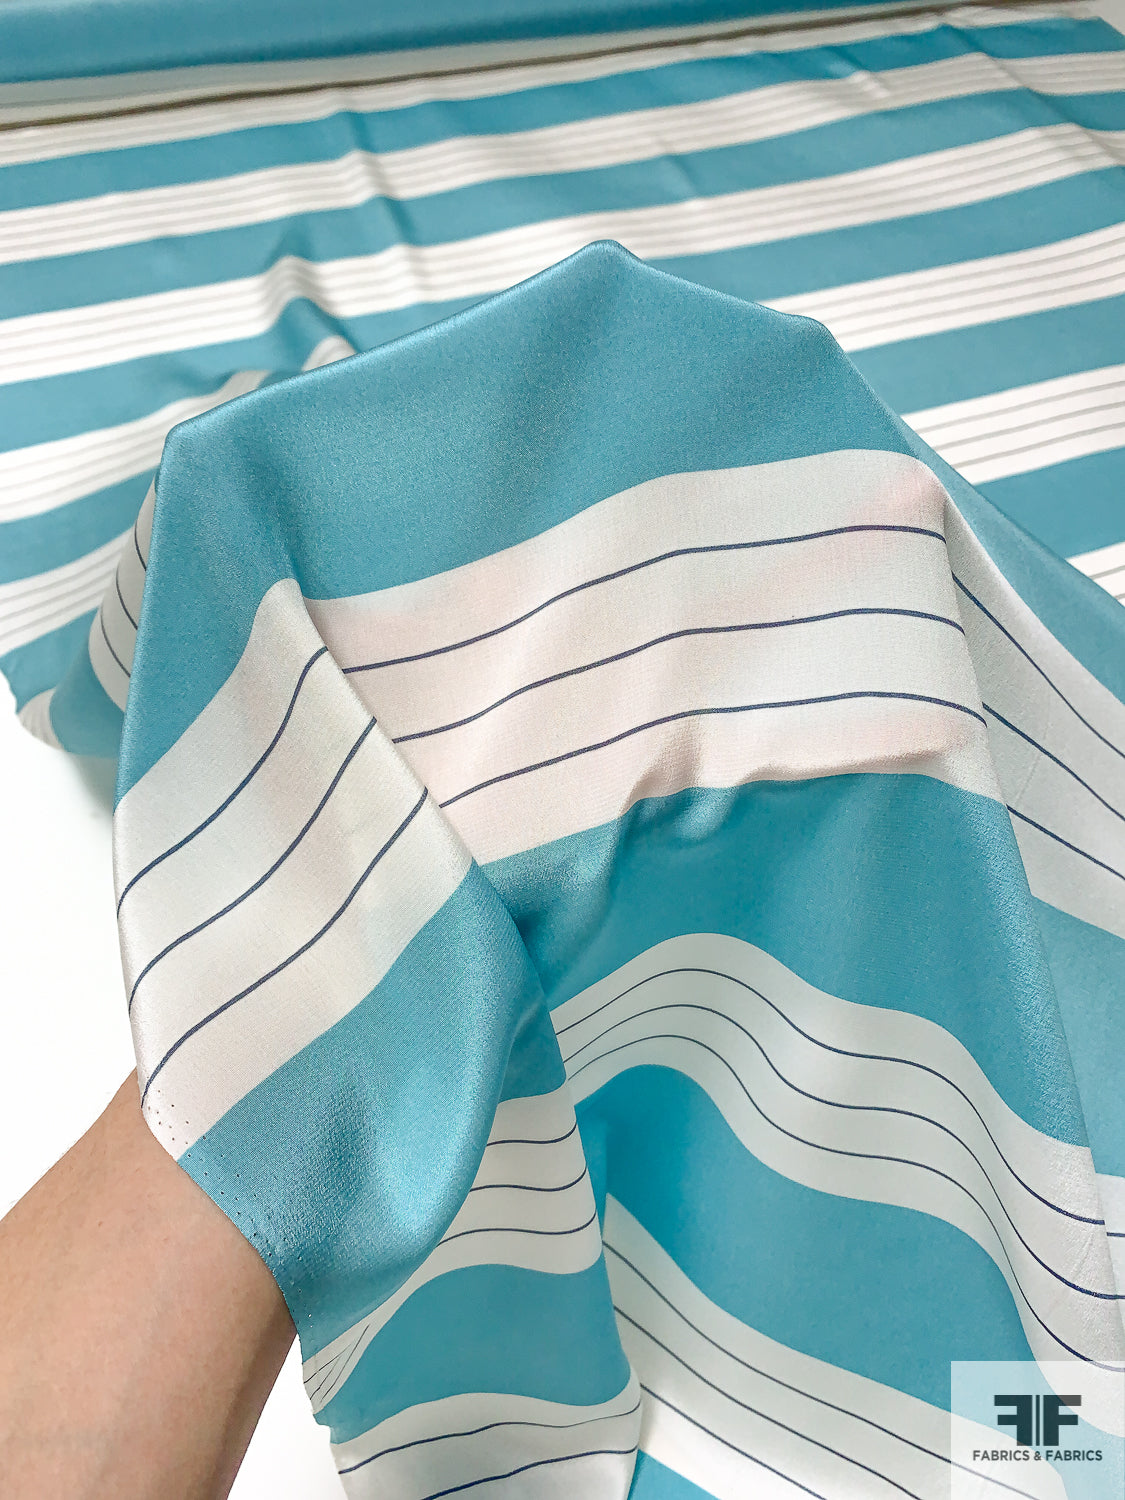 Horizontal Striped Printed Silk Crepe de Chine - Soft Turquoise / Off-White / Navy